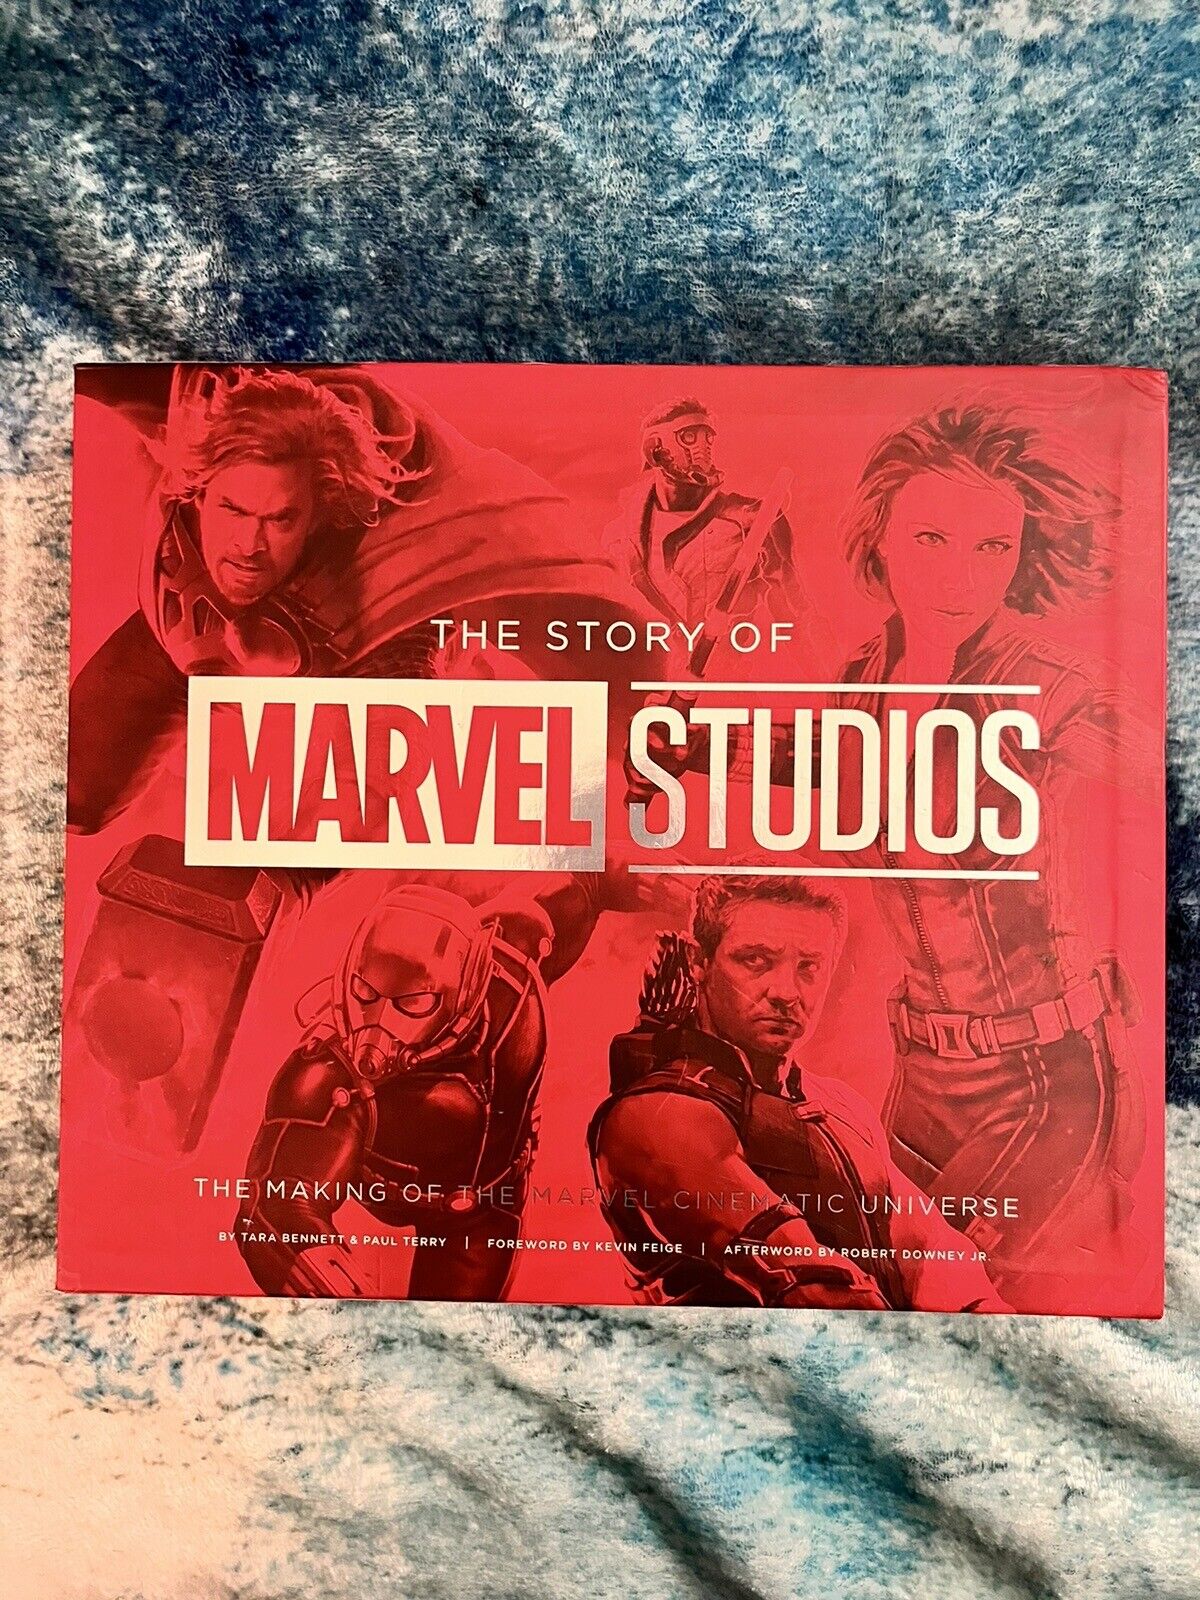 The History Of Marvel Studios: The Making Of The Marvel Cinematic Universe